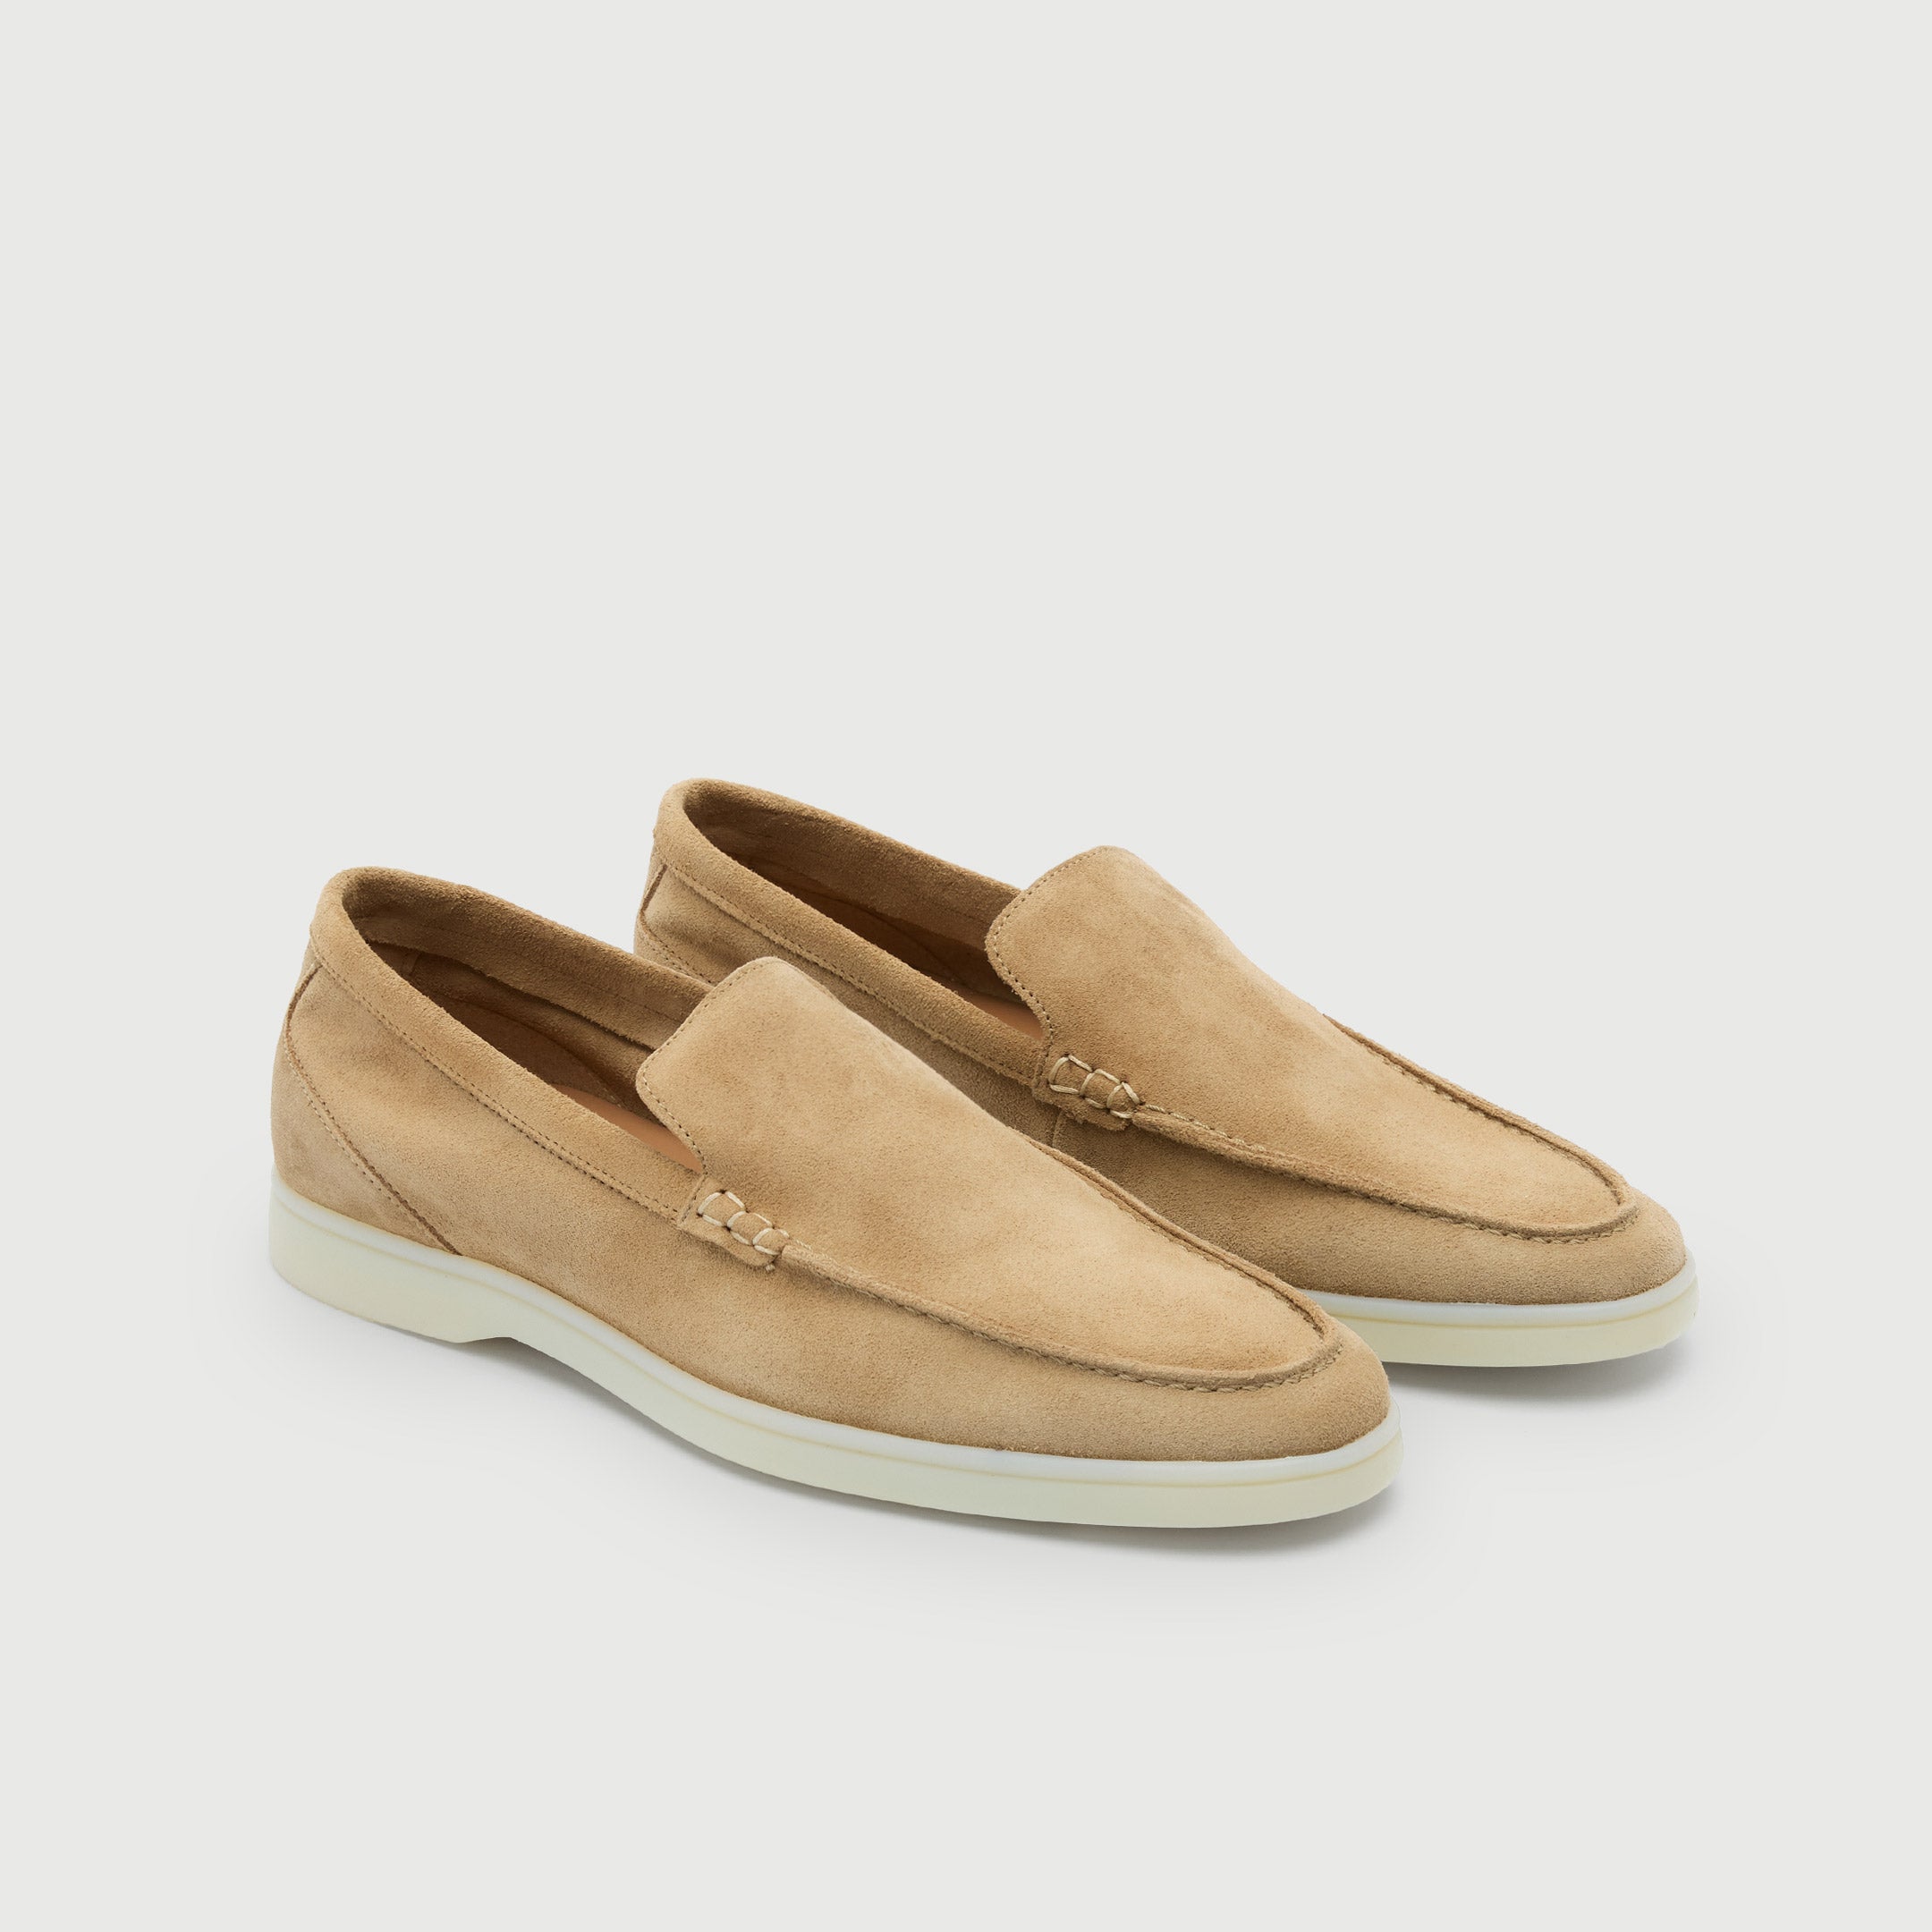 Walk London Mens Monaco Slip On Loafer in Taupe Suede